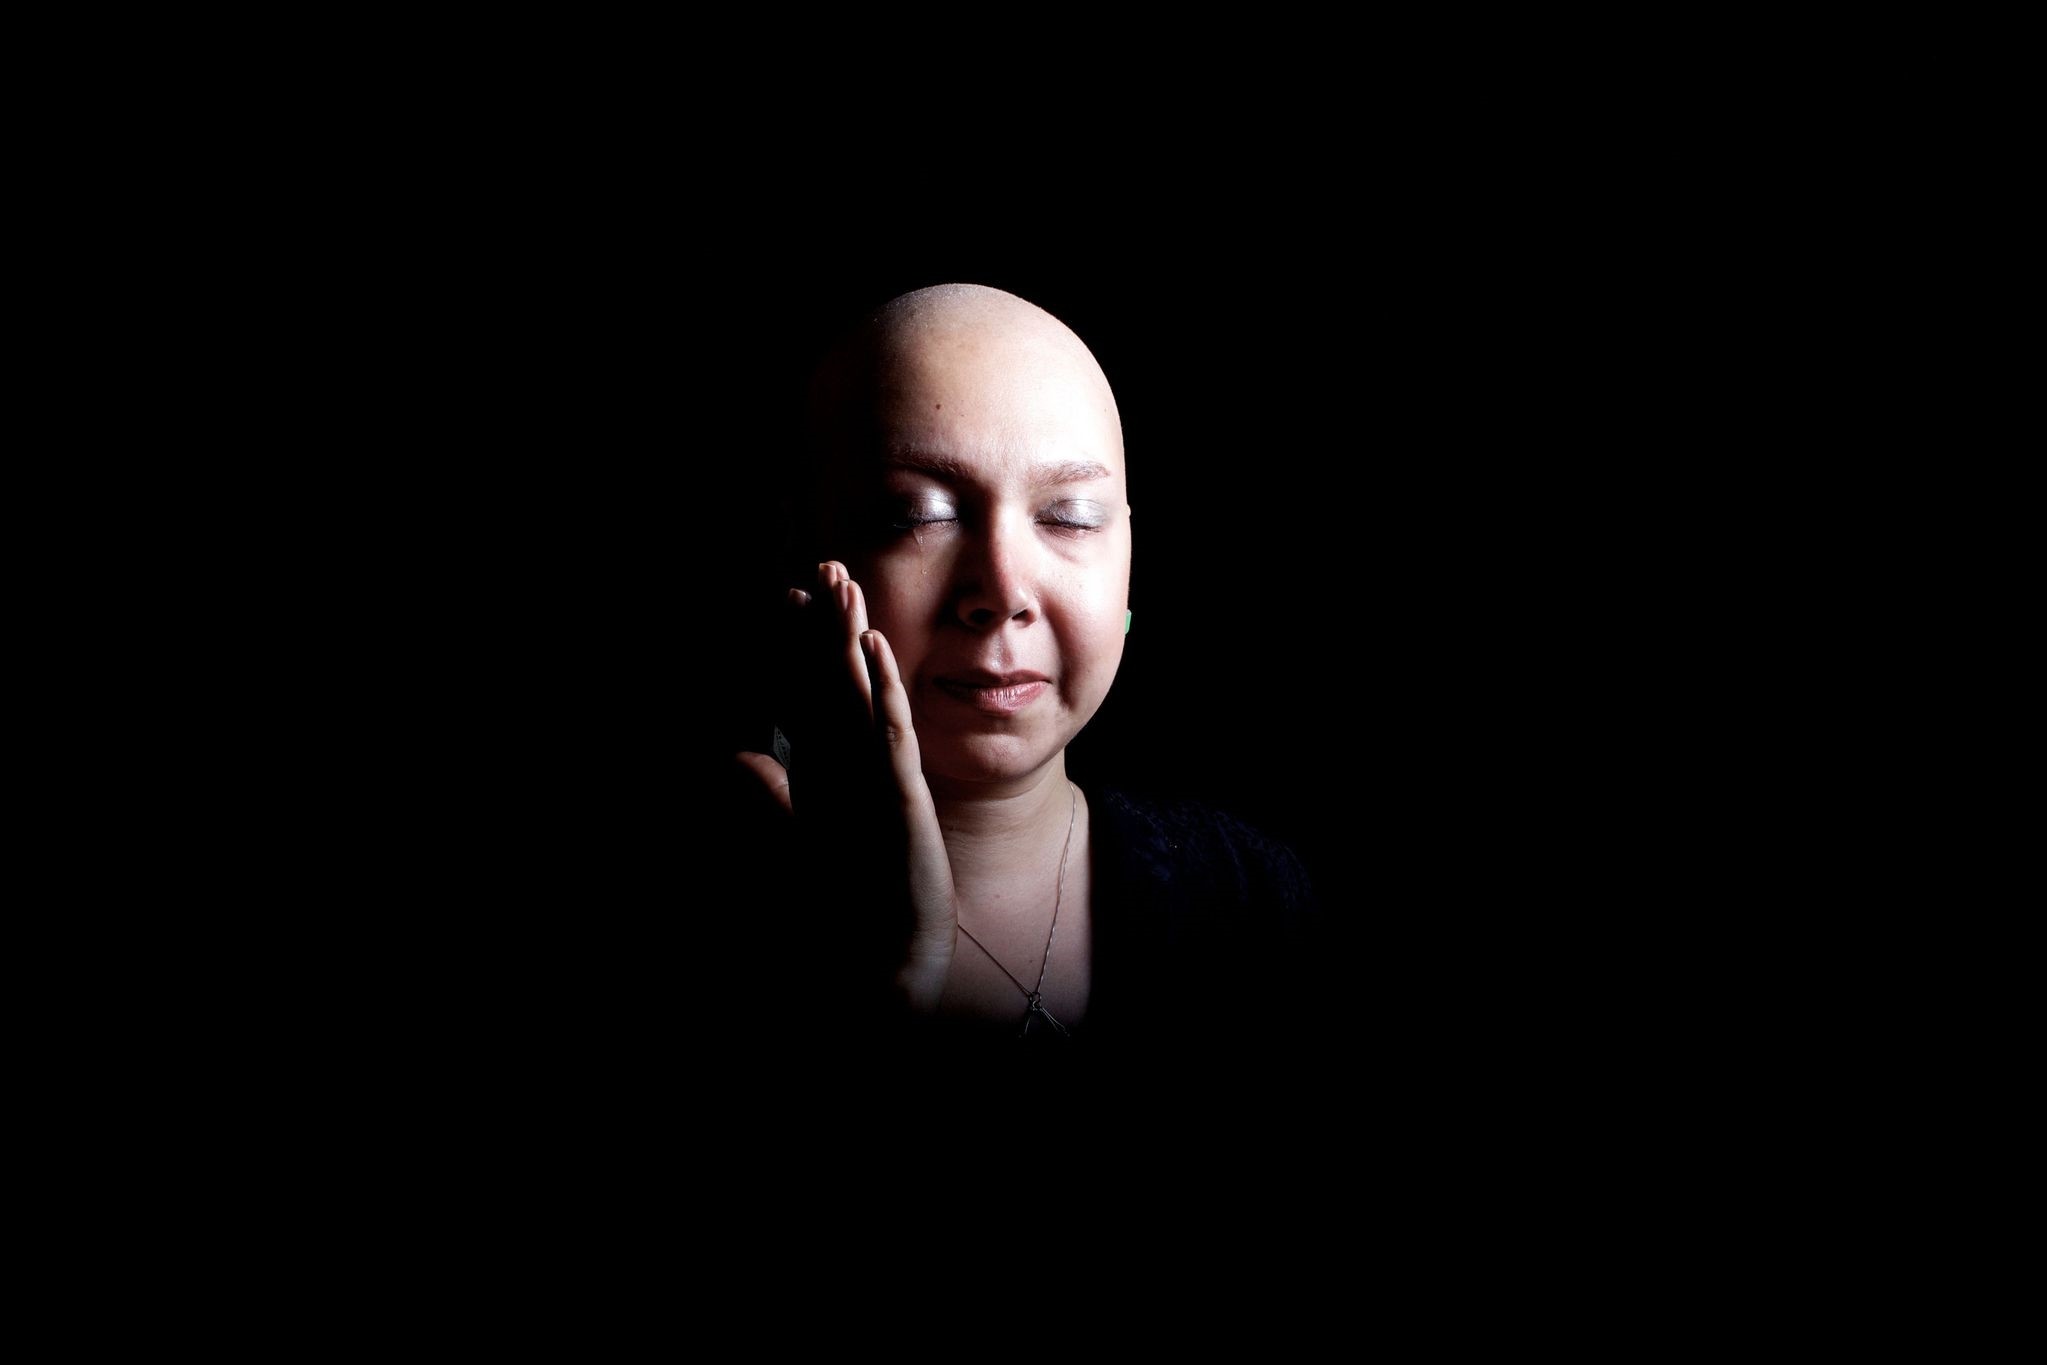 his file photo taken on October 12, 2013 shows Iranian breast cancer patient Farvah posing for a portrait in a studio in Tehran. (AFP Photo)